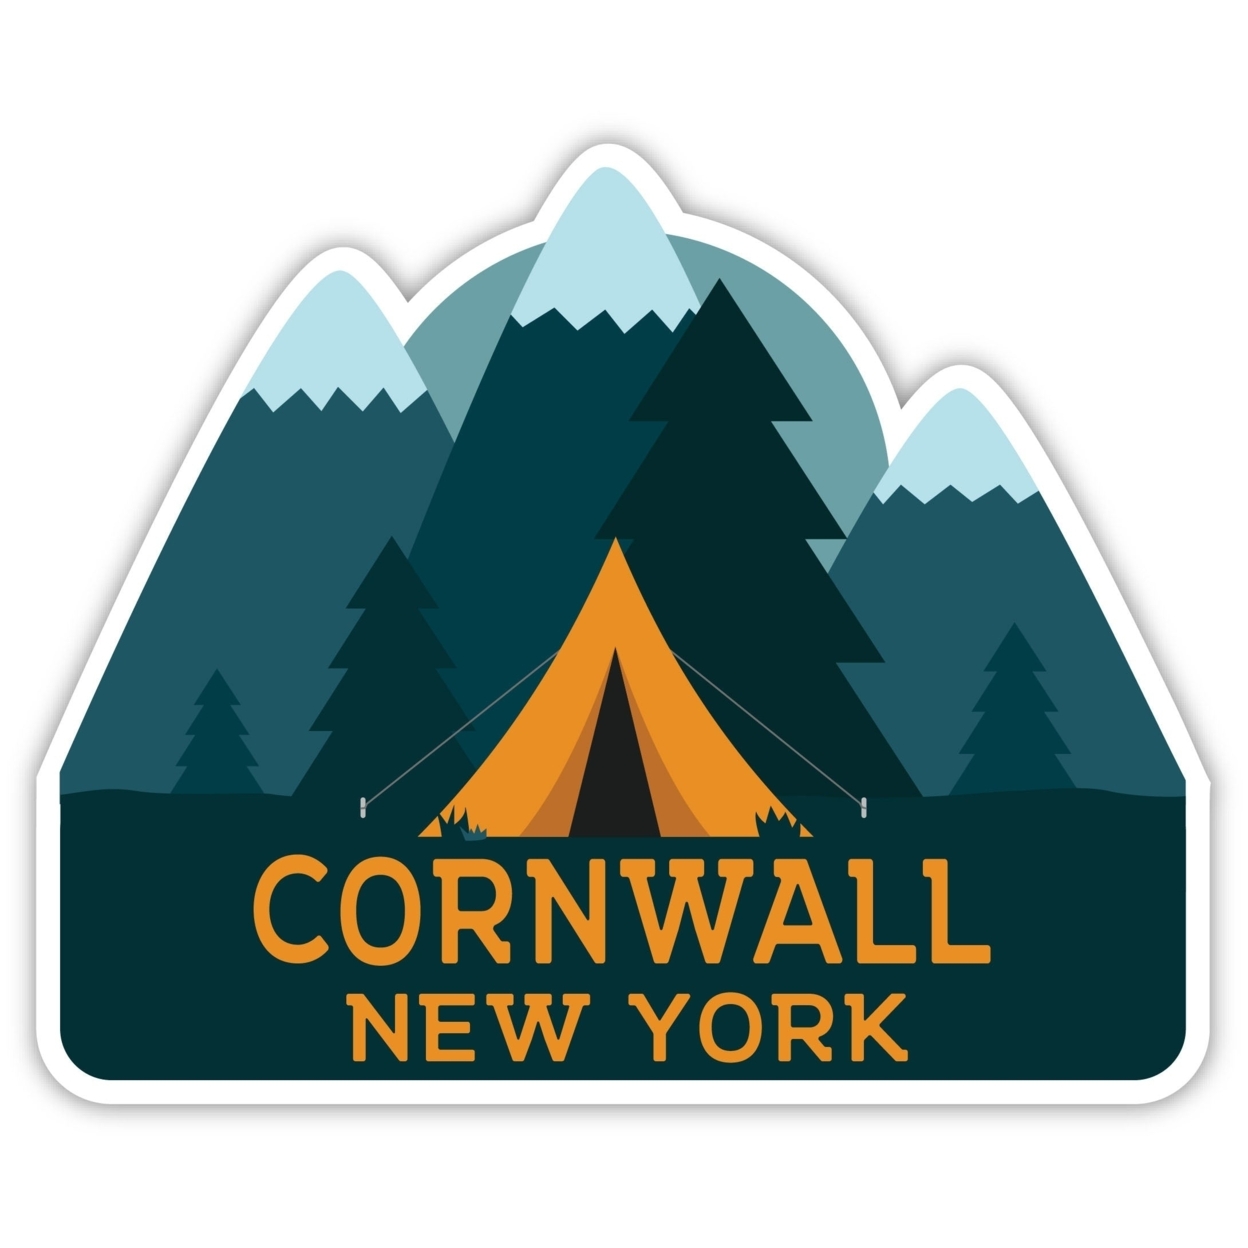 Cornwall New York Souvenir Decorative Stickers (Choose Theme And Size) - 4-Pack, 4-Inch, Tent